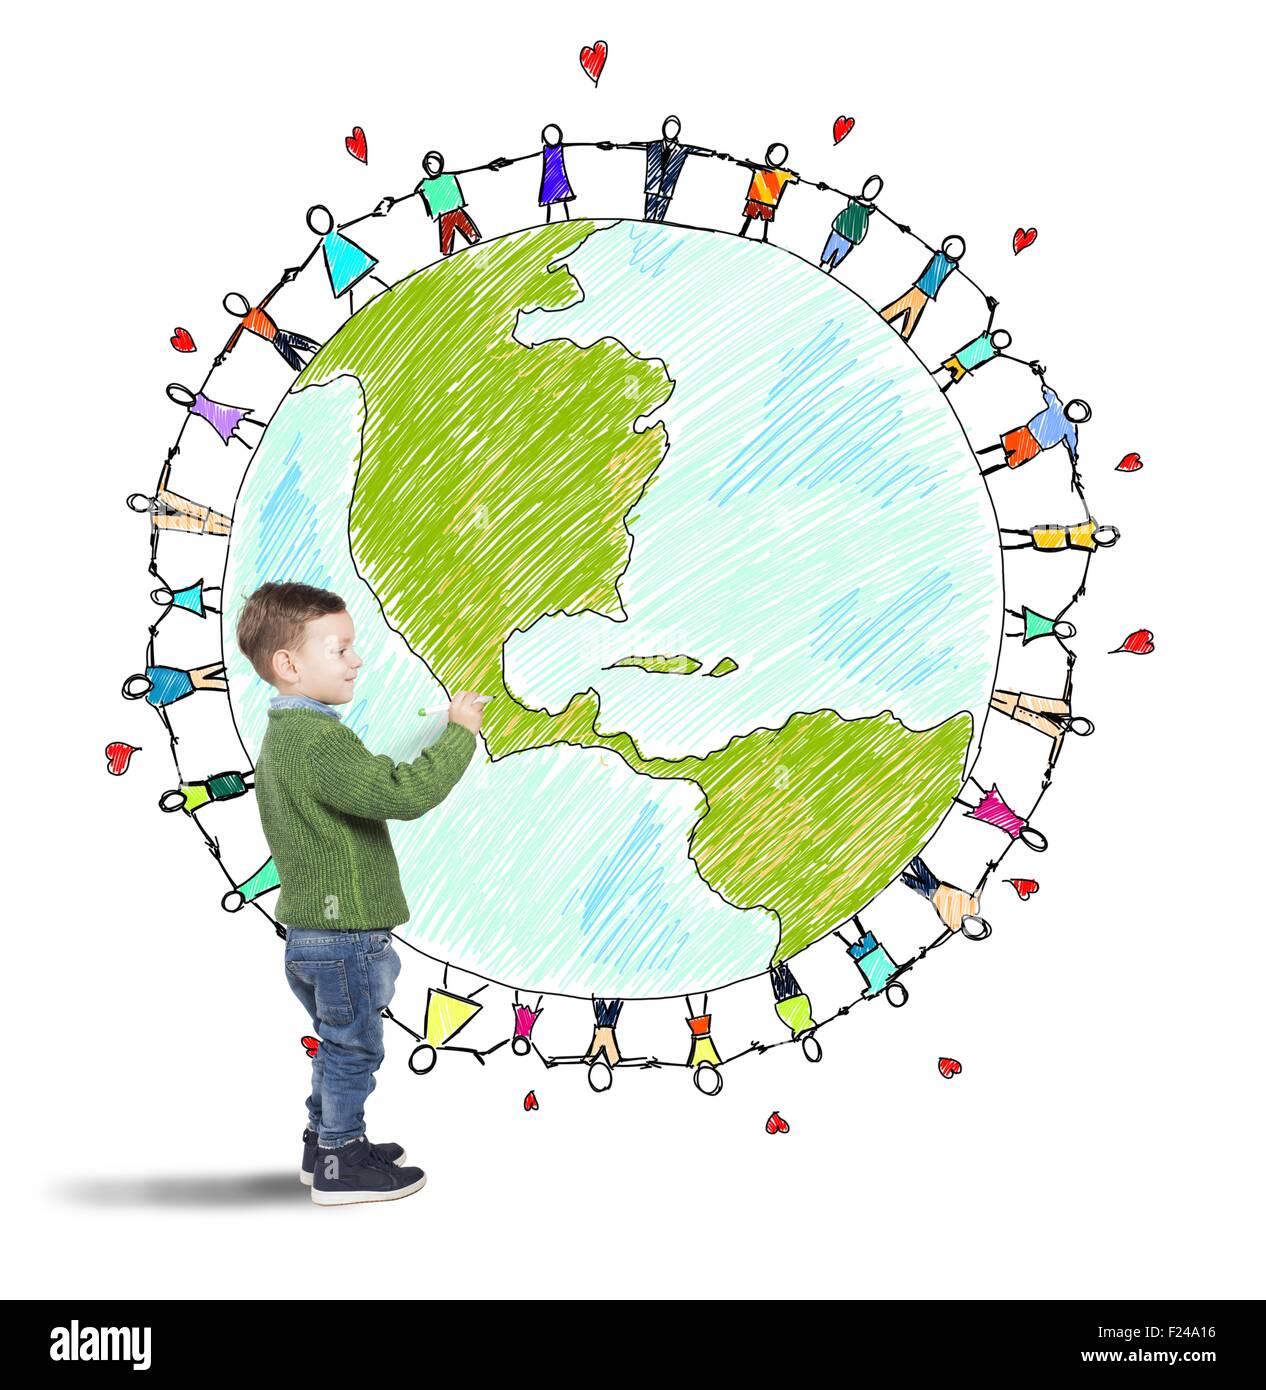 Solidarity world of a child Stock Photo